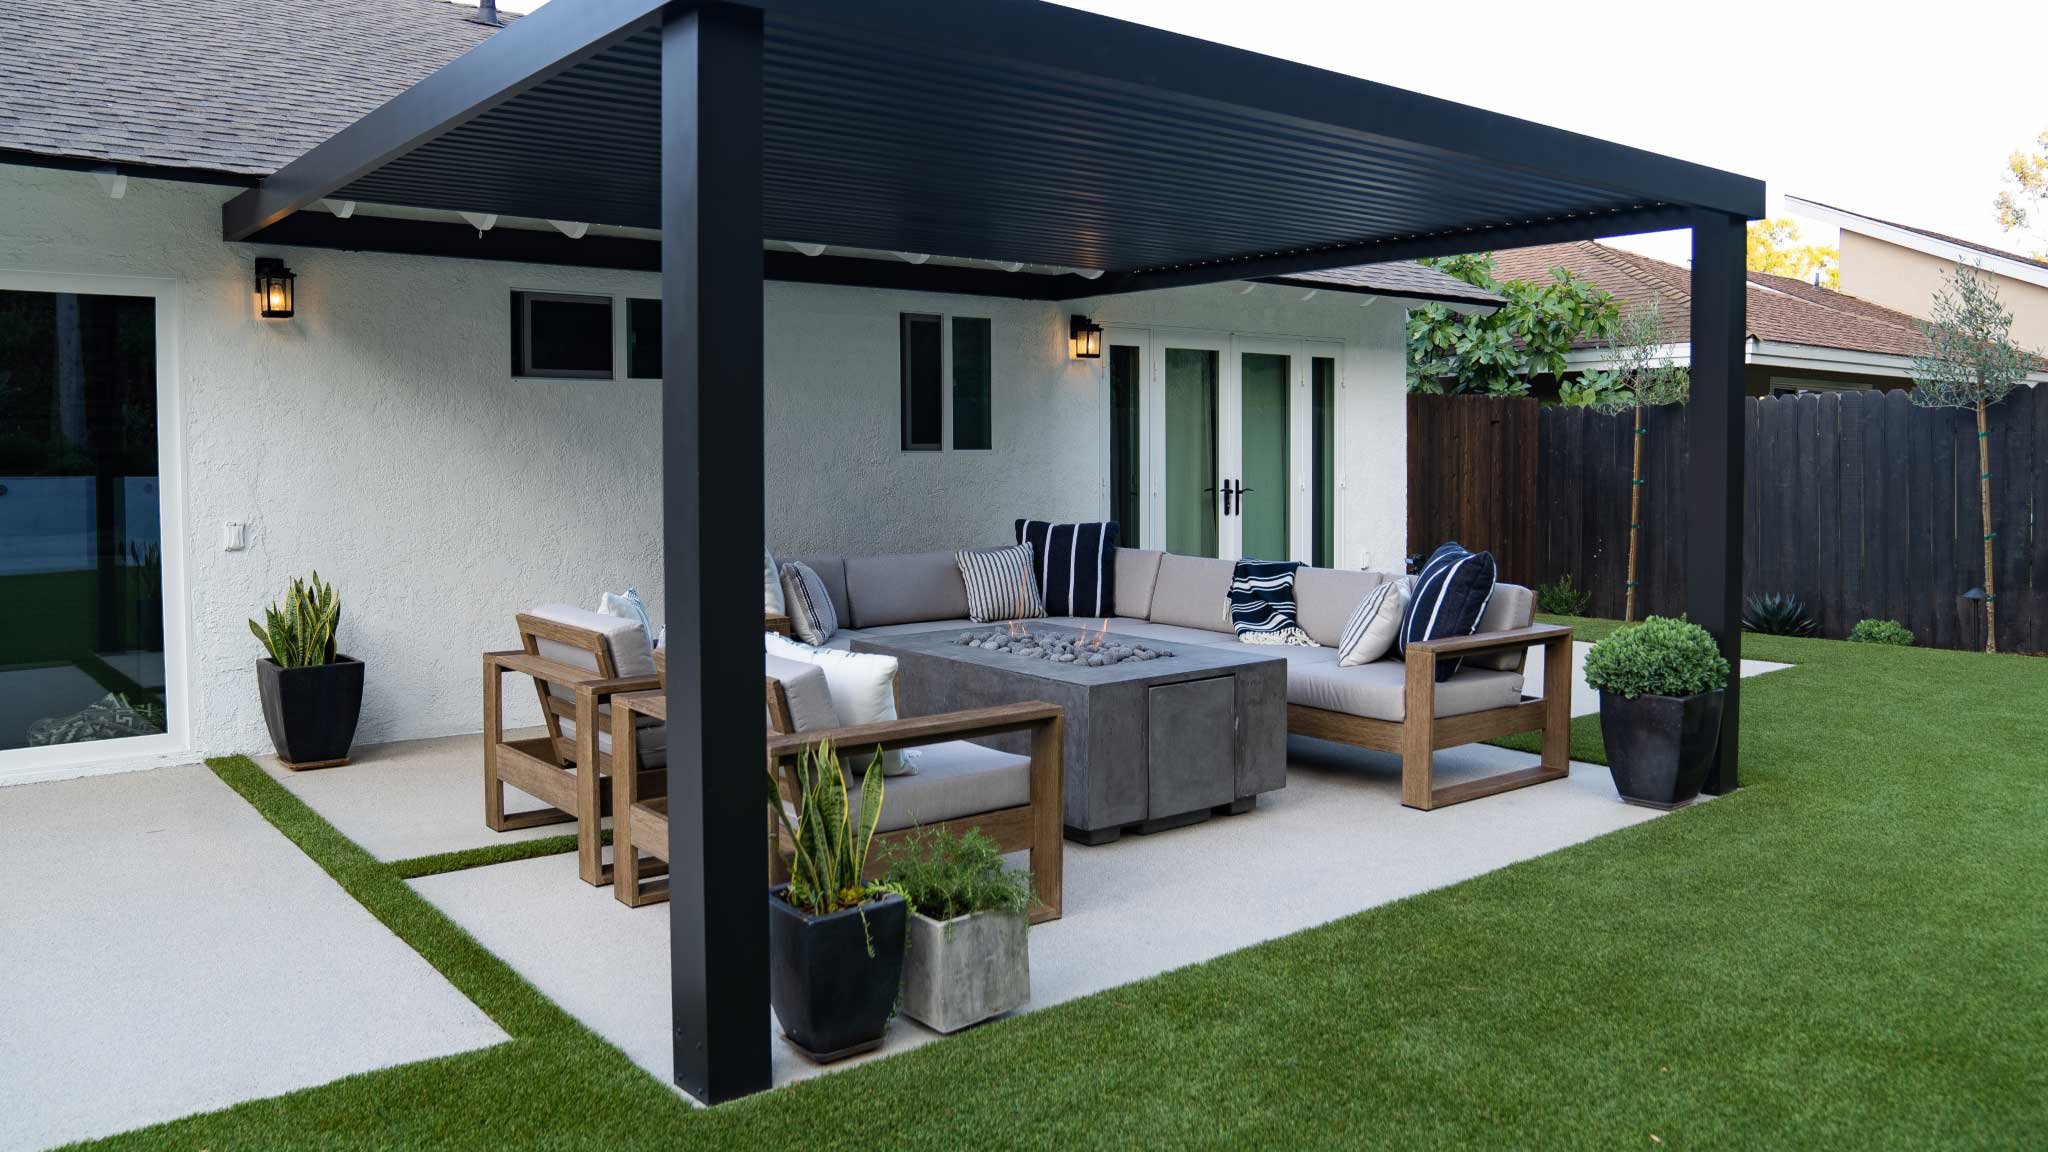 Black modern pergola attached to back of home over concrete paver patio and fire pit seating area